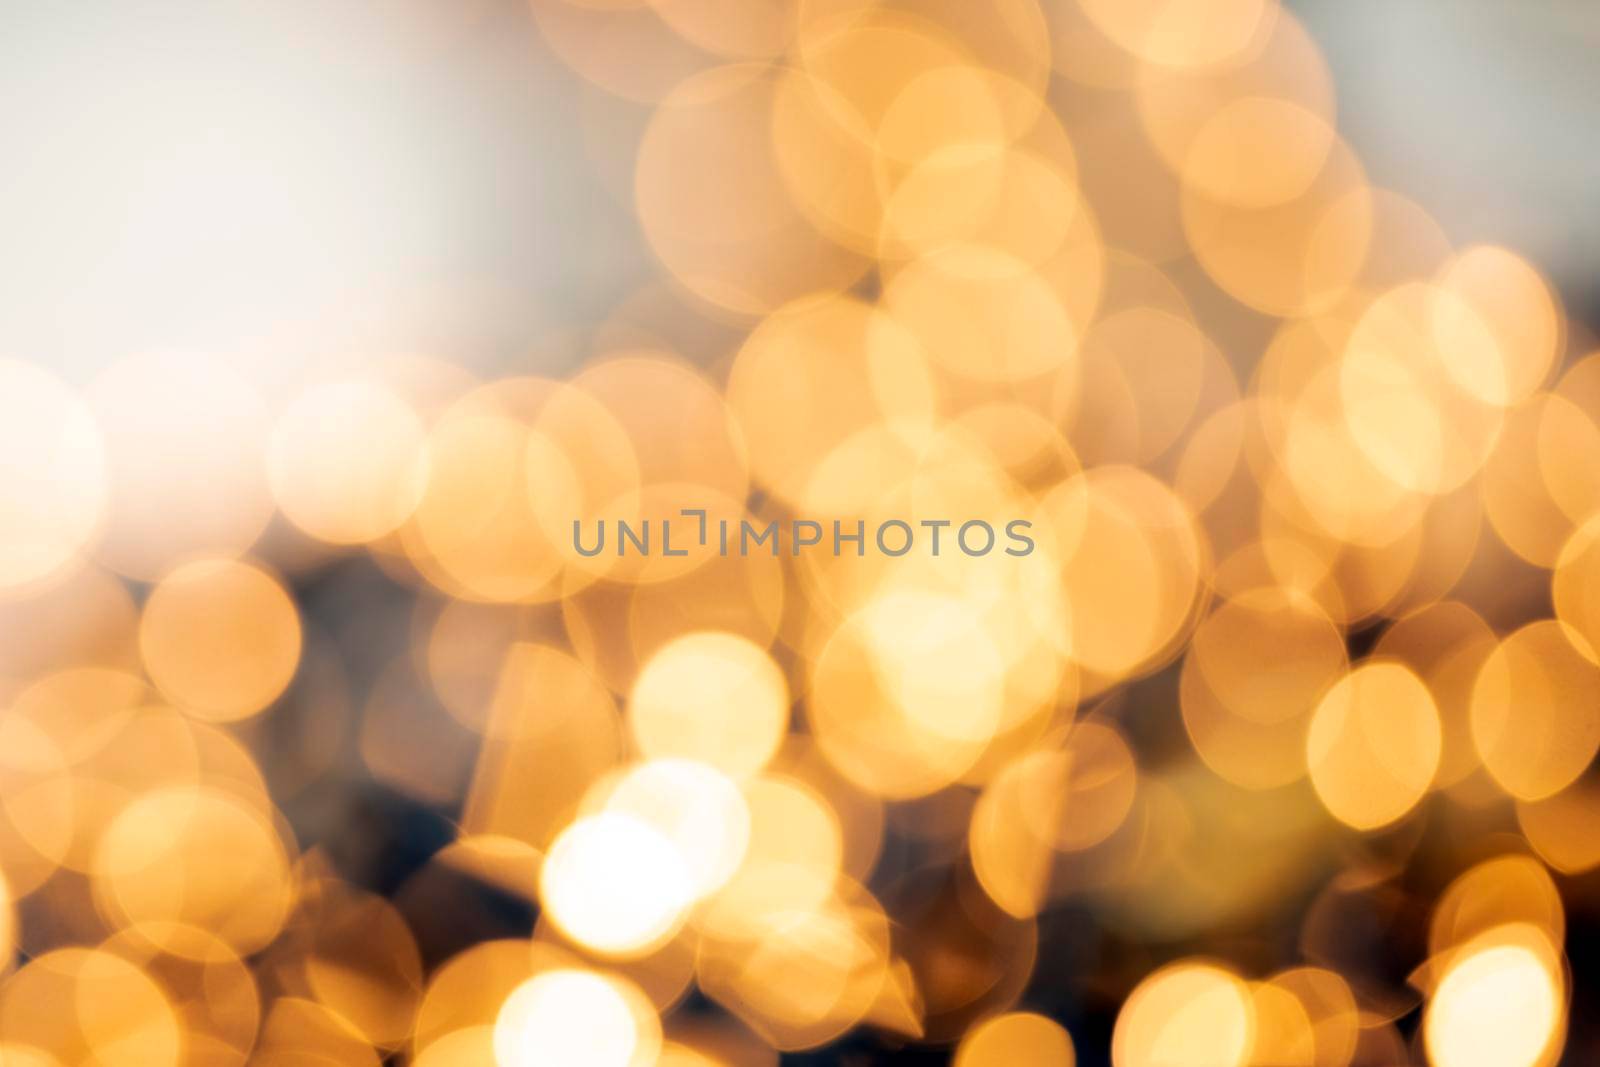 Defocused gold light abstract Christmas or Holiday background texture, sparkling yellow blurred warm tones by Annebel146